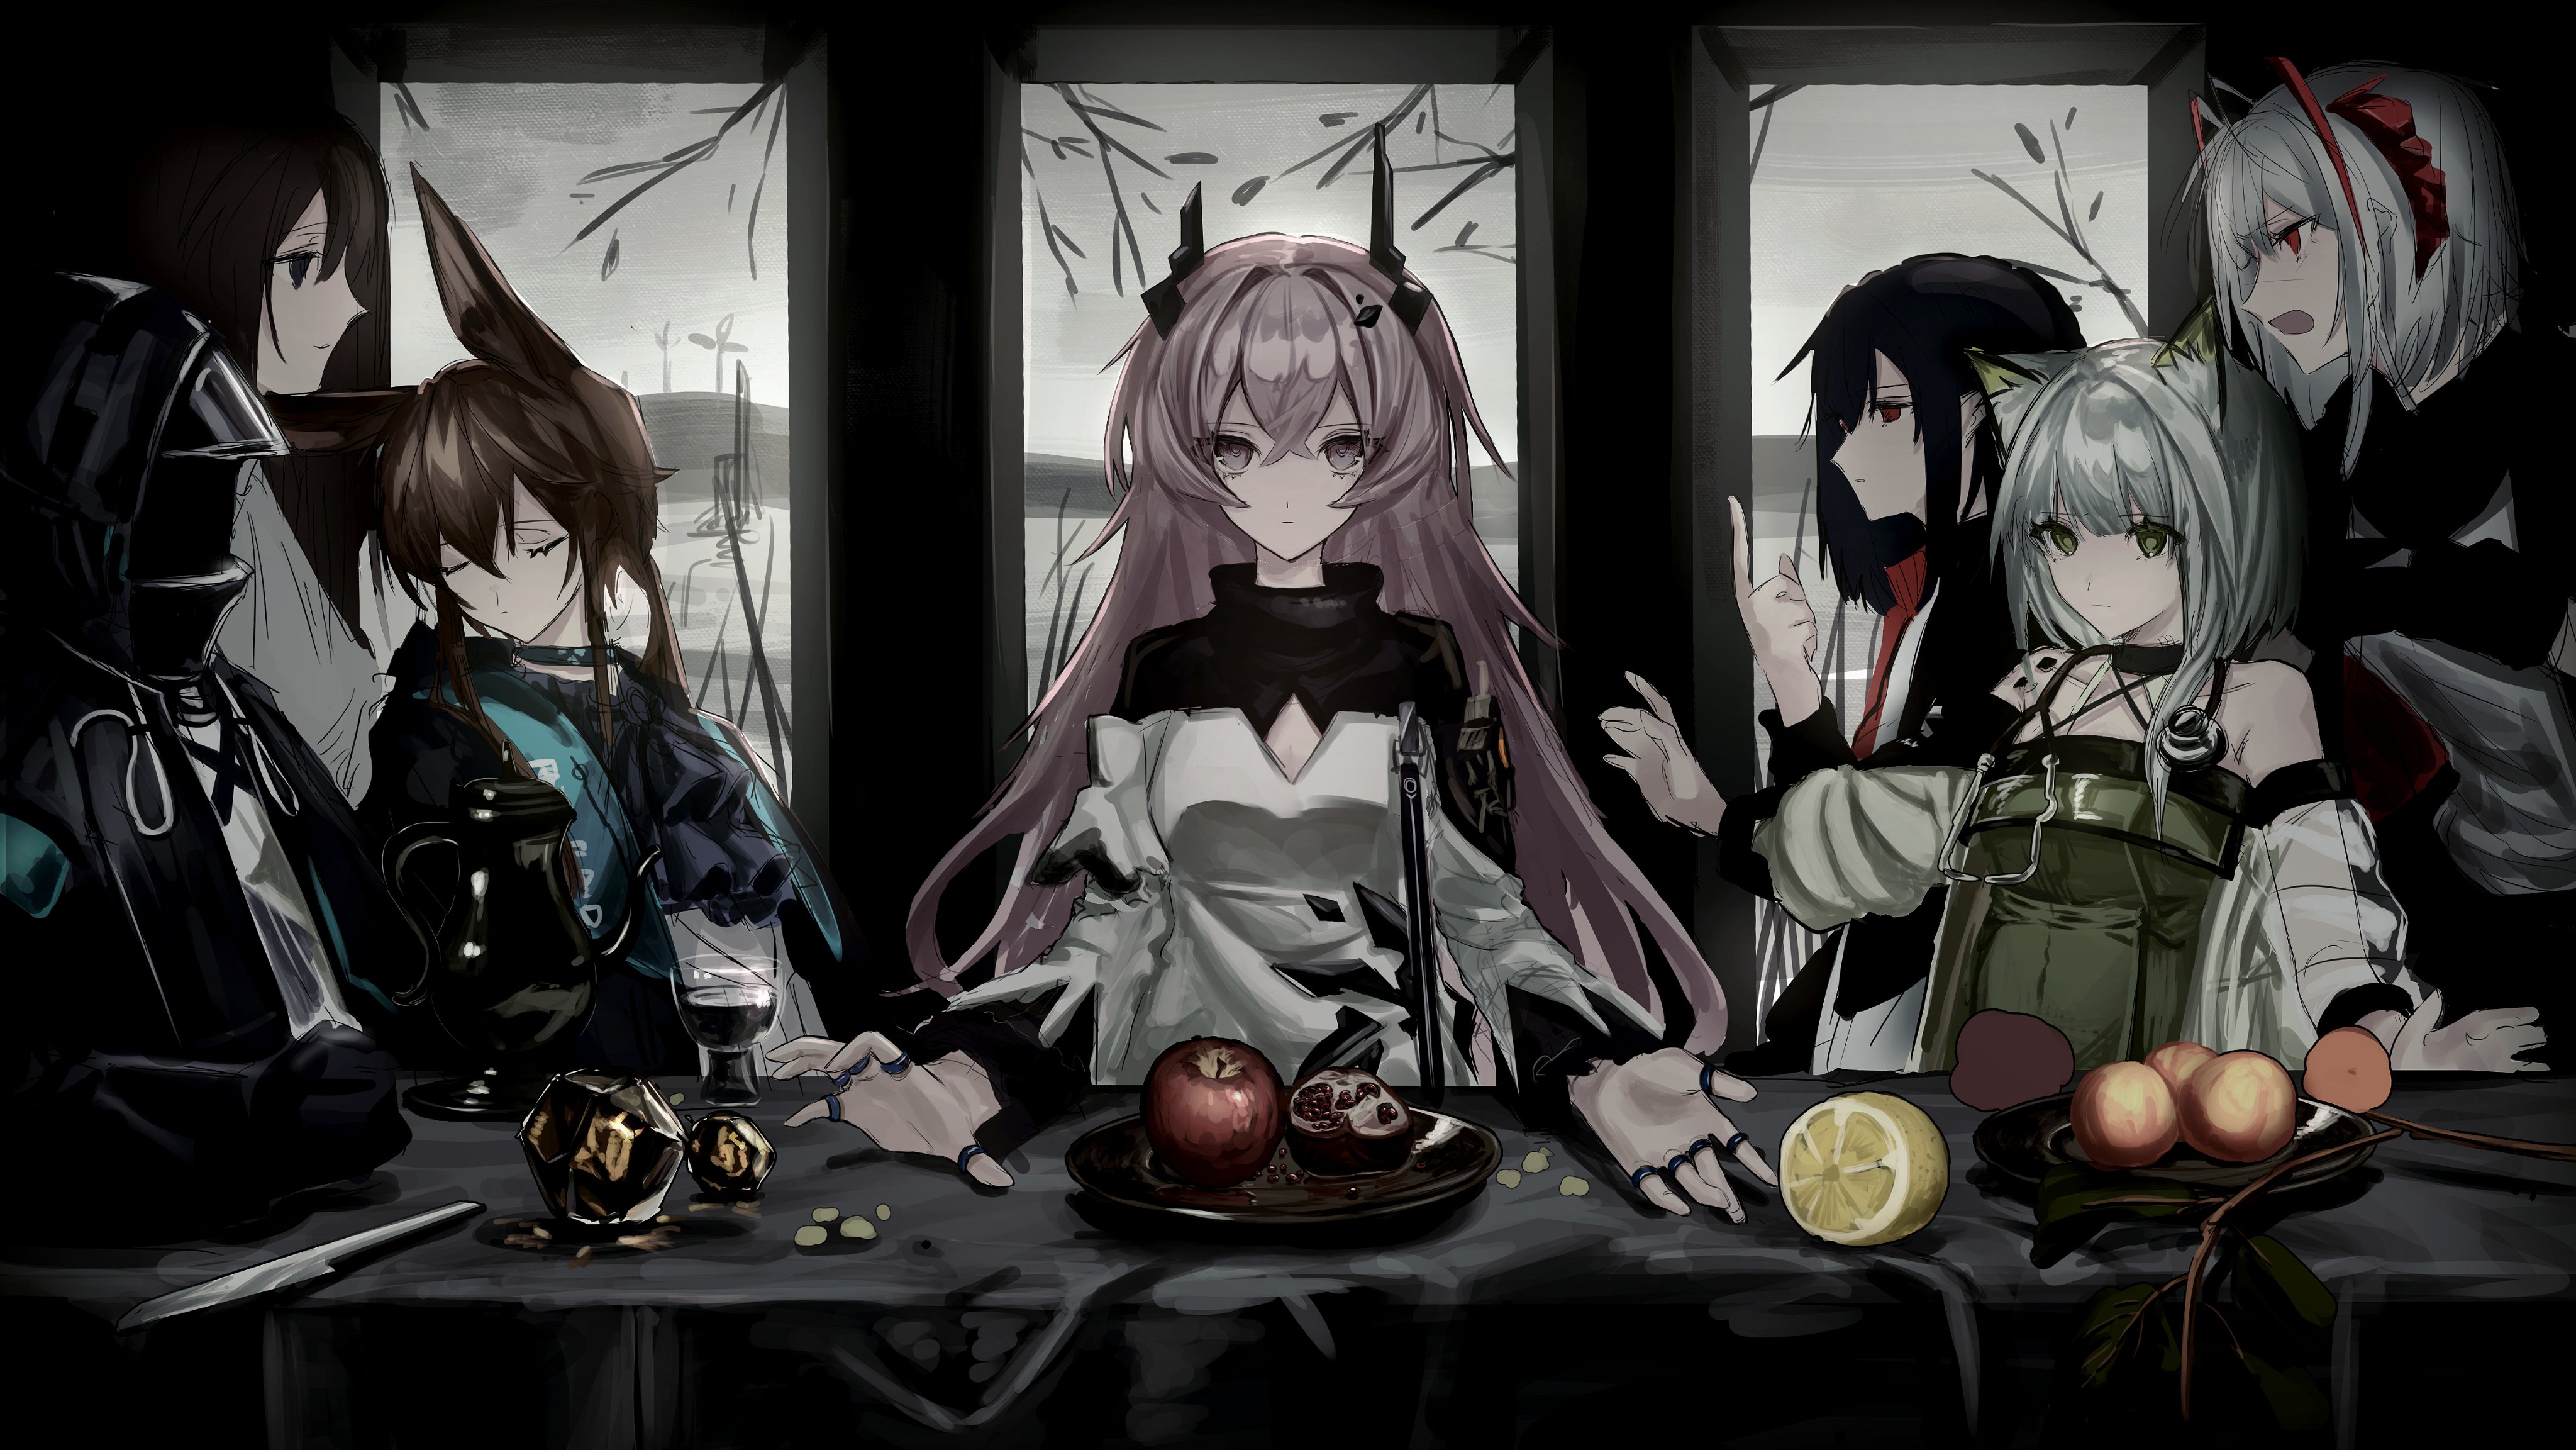 Arknights Anime Girls The Last Supper Doctor Arknights Amiya Arknights Kaltsit Arknights W Arknights 4096x2305